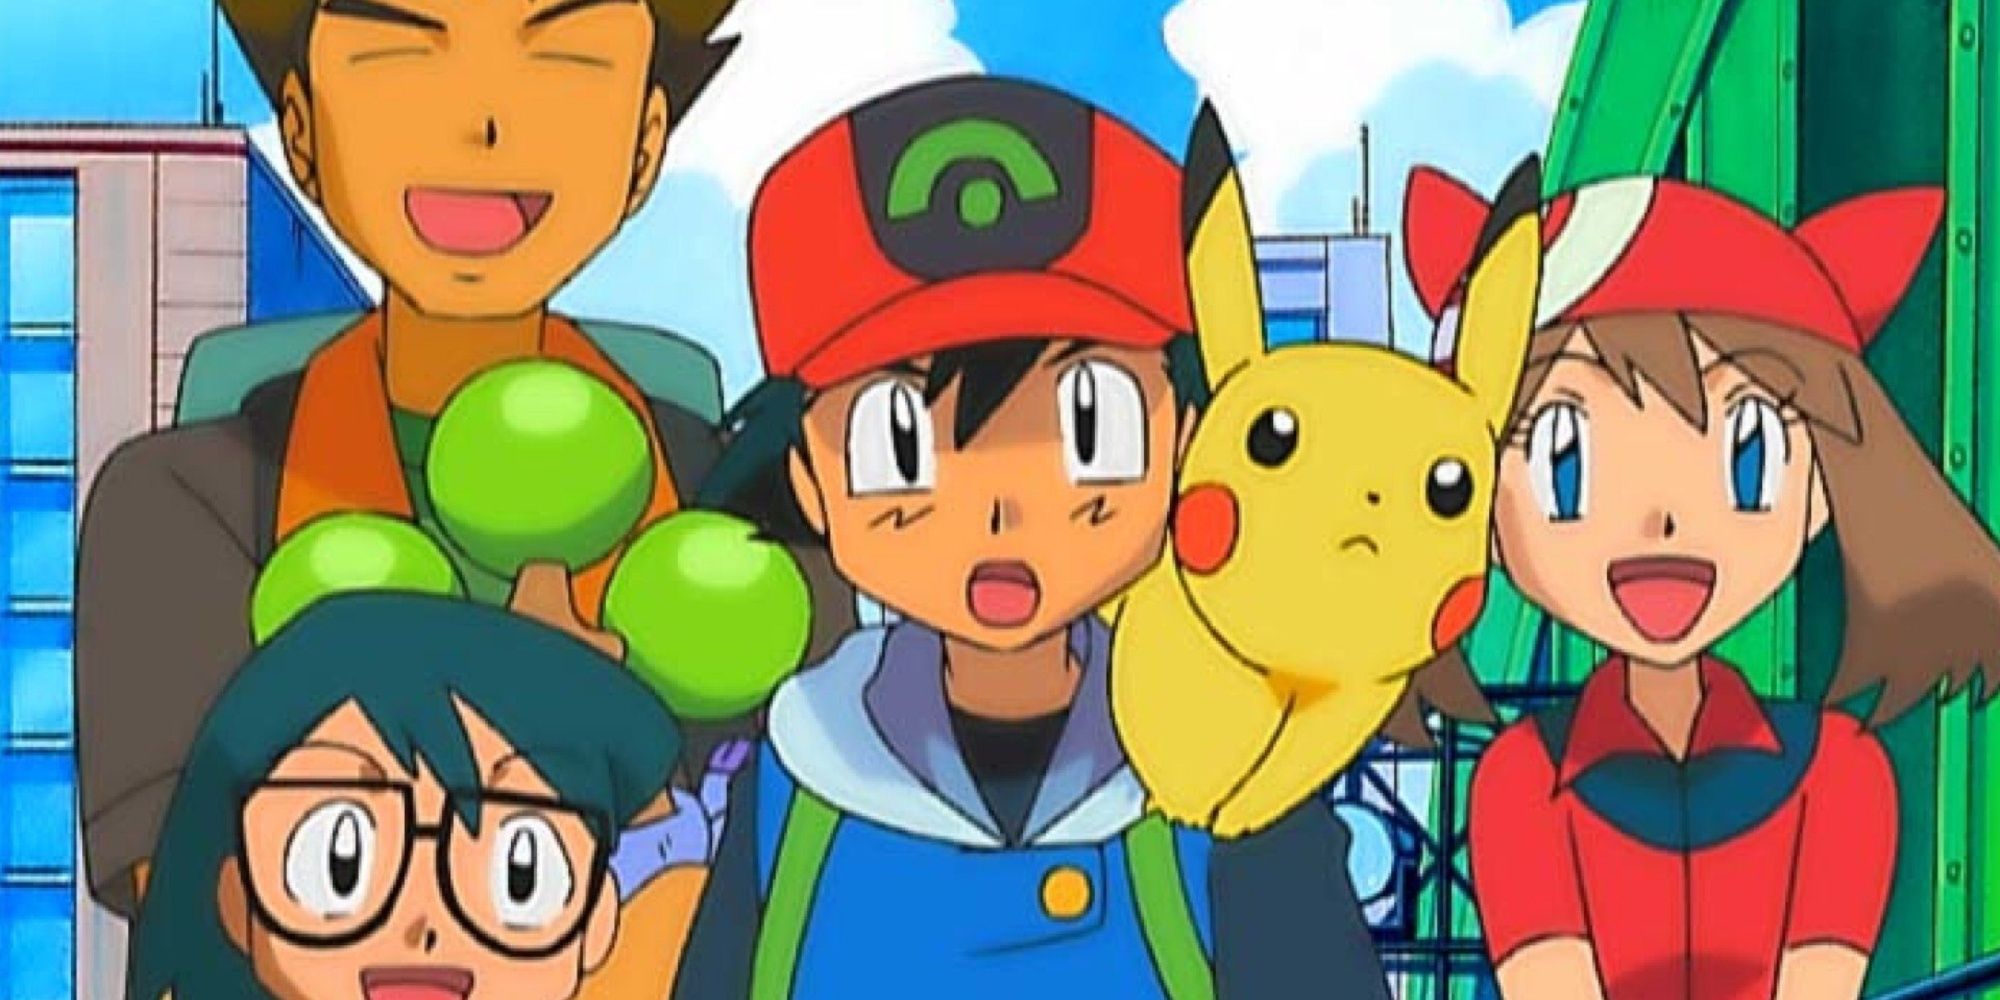 ash brock pikachu and other characters from the pokemon anime